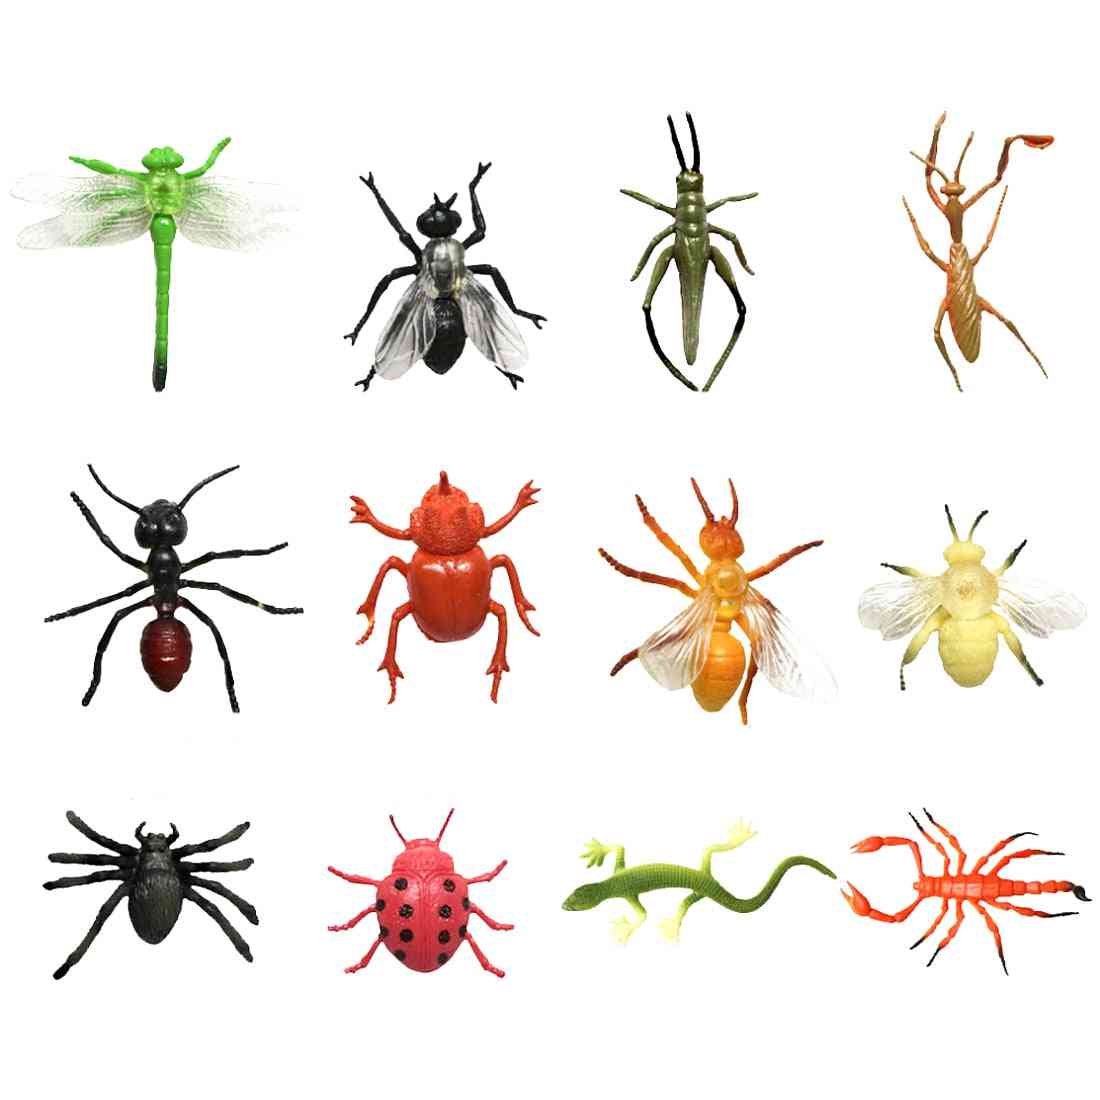 Classic Biology Science Insect Model Kit Educational